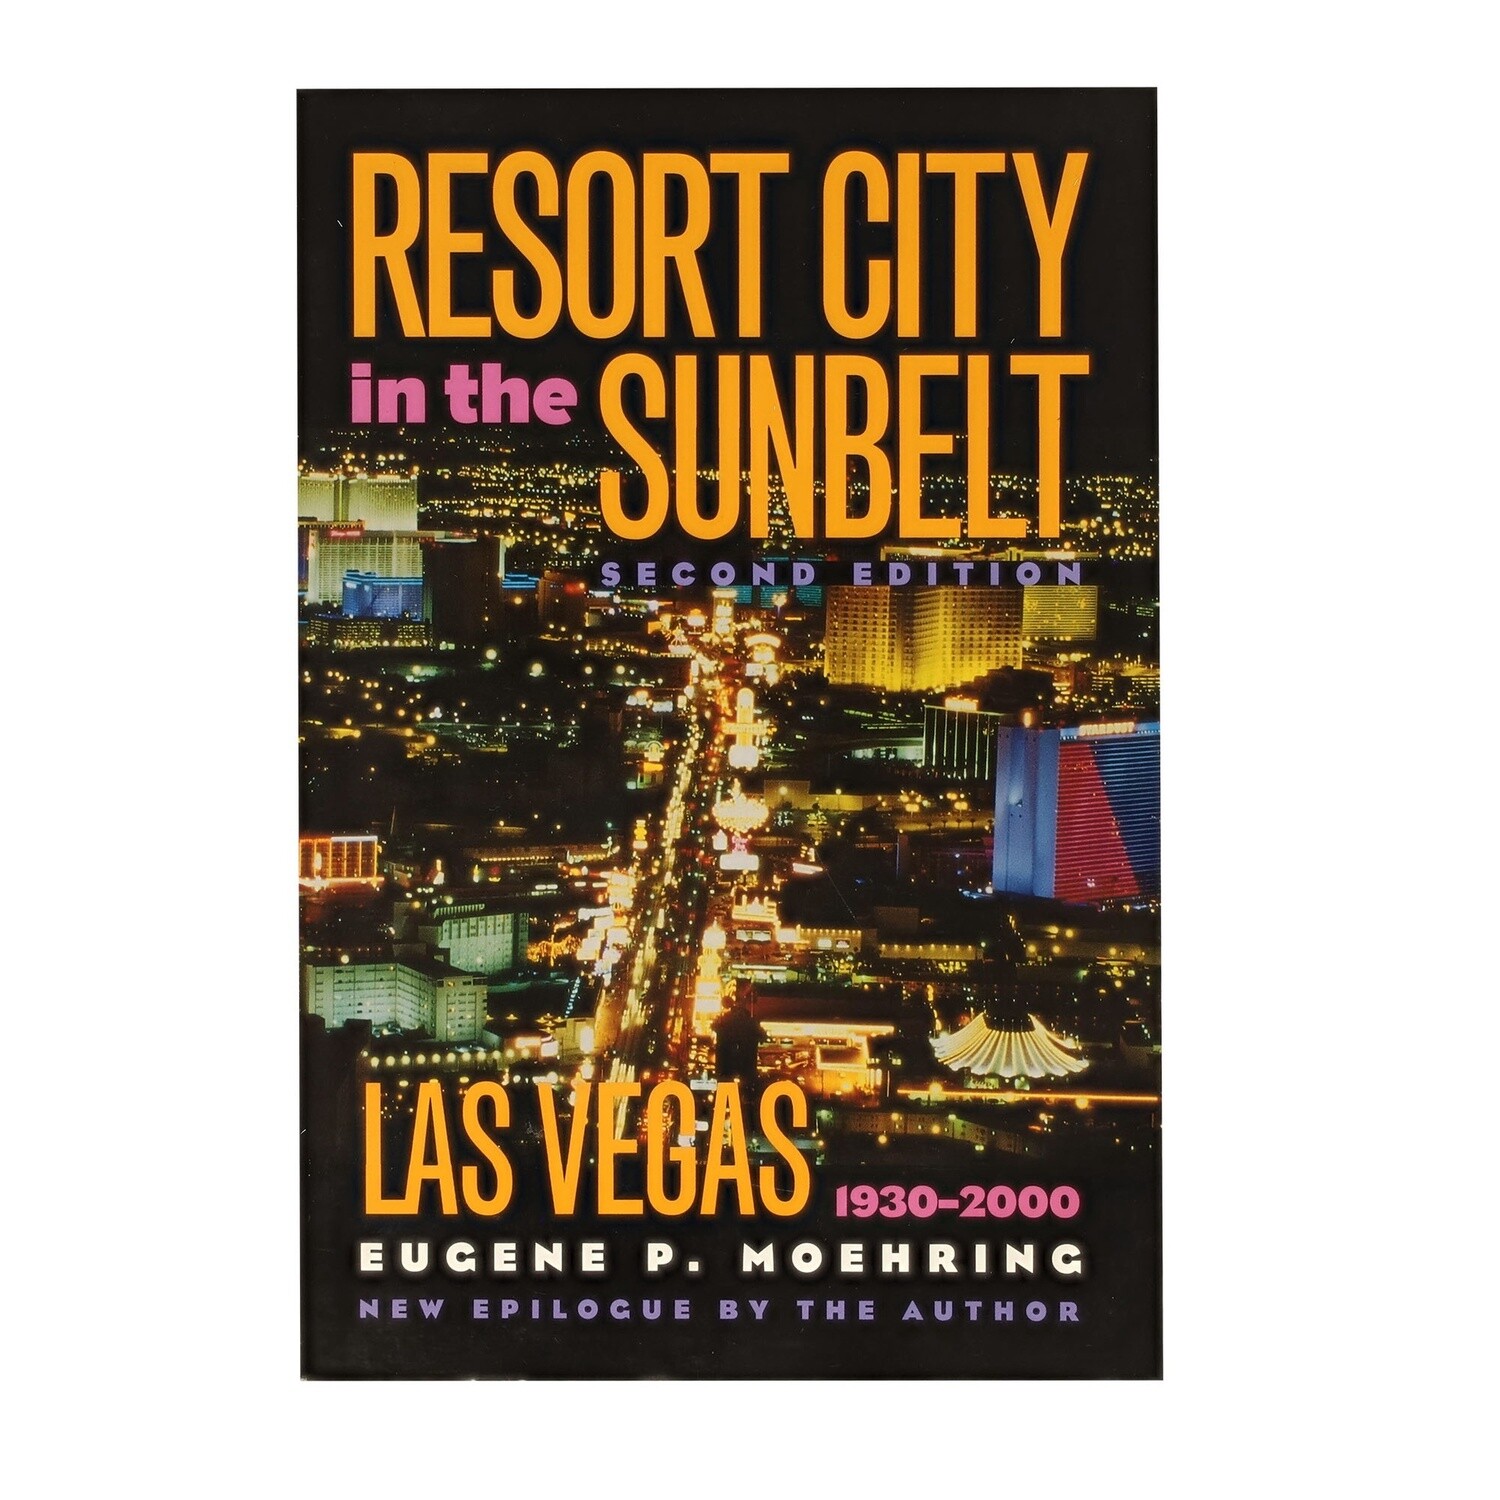 Resort City in the Sunbelt Second Edition Las Vegas 1930-2000 by Eugene P. Moehring